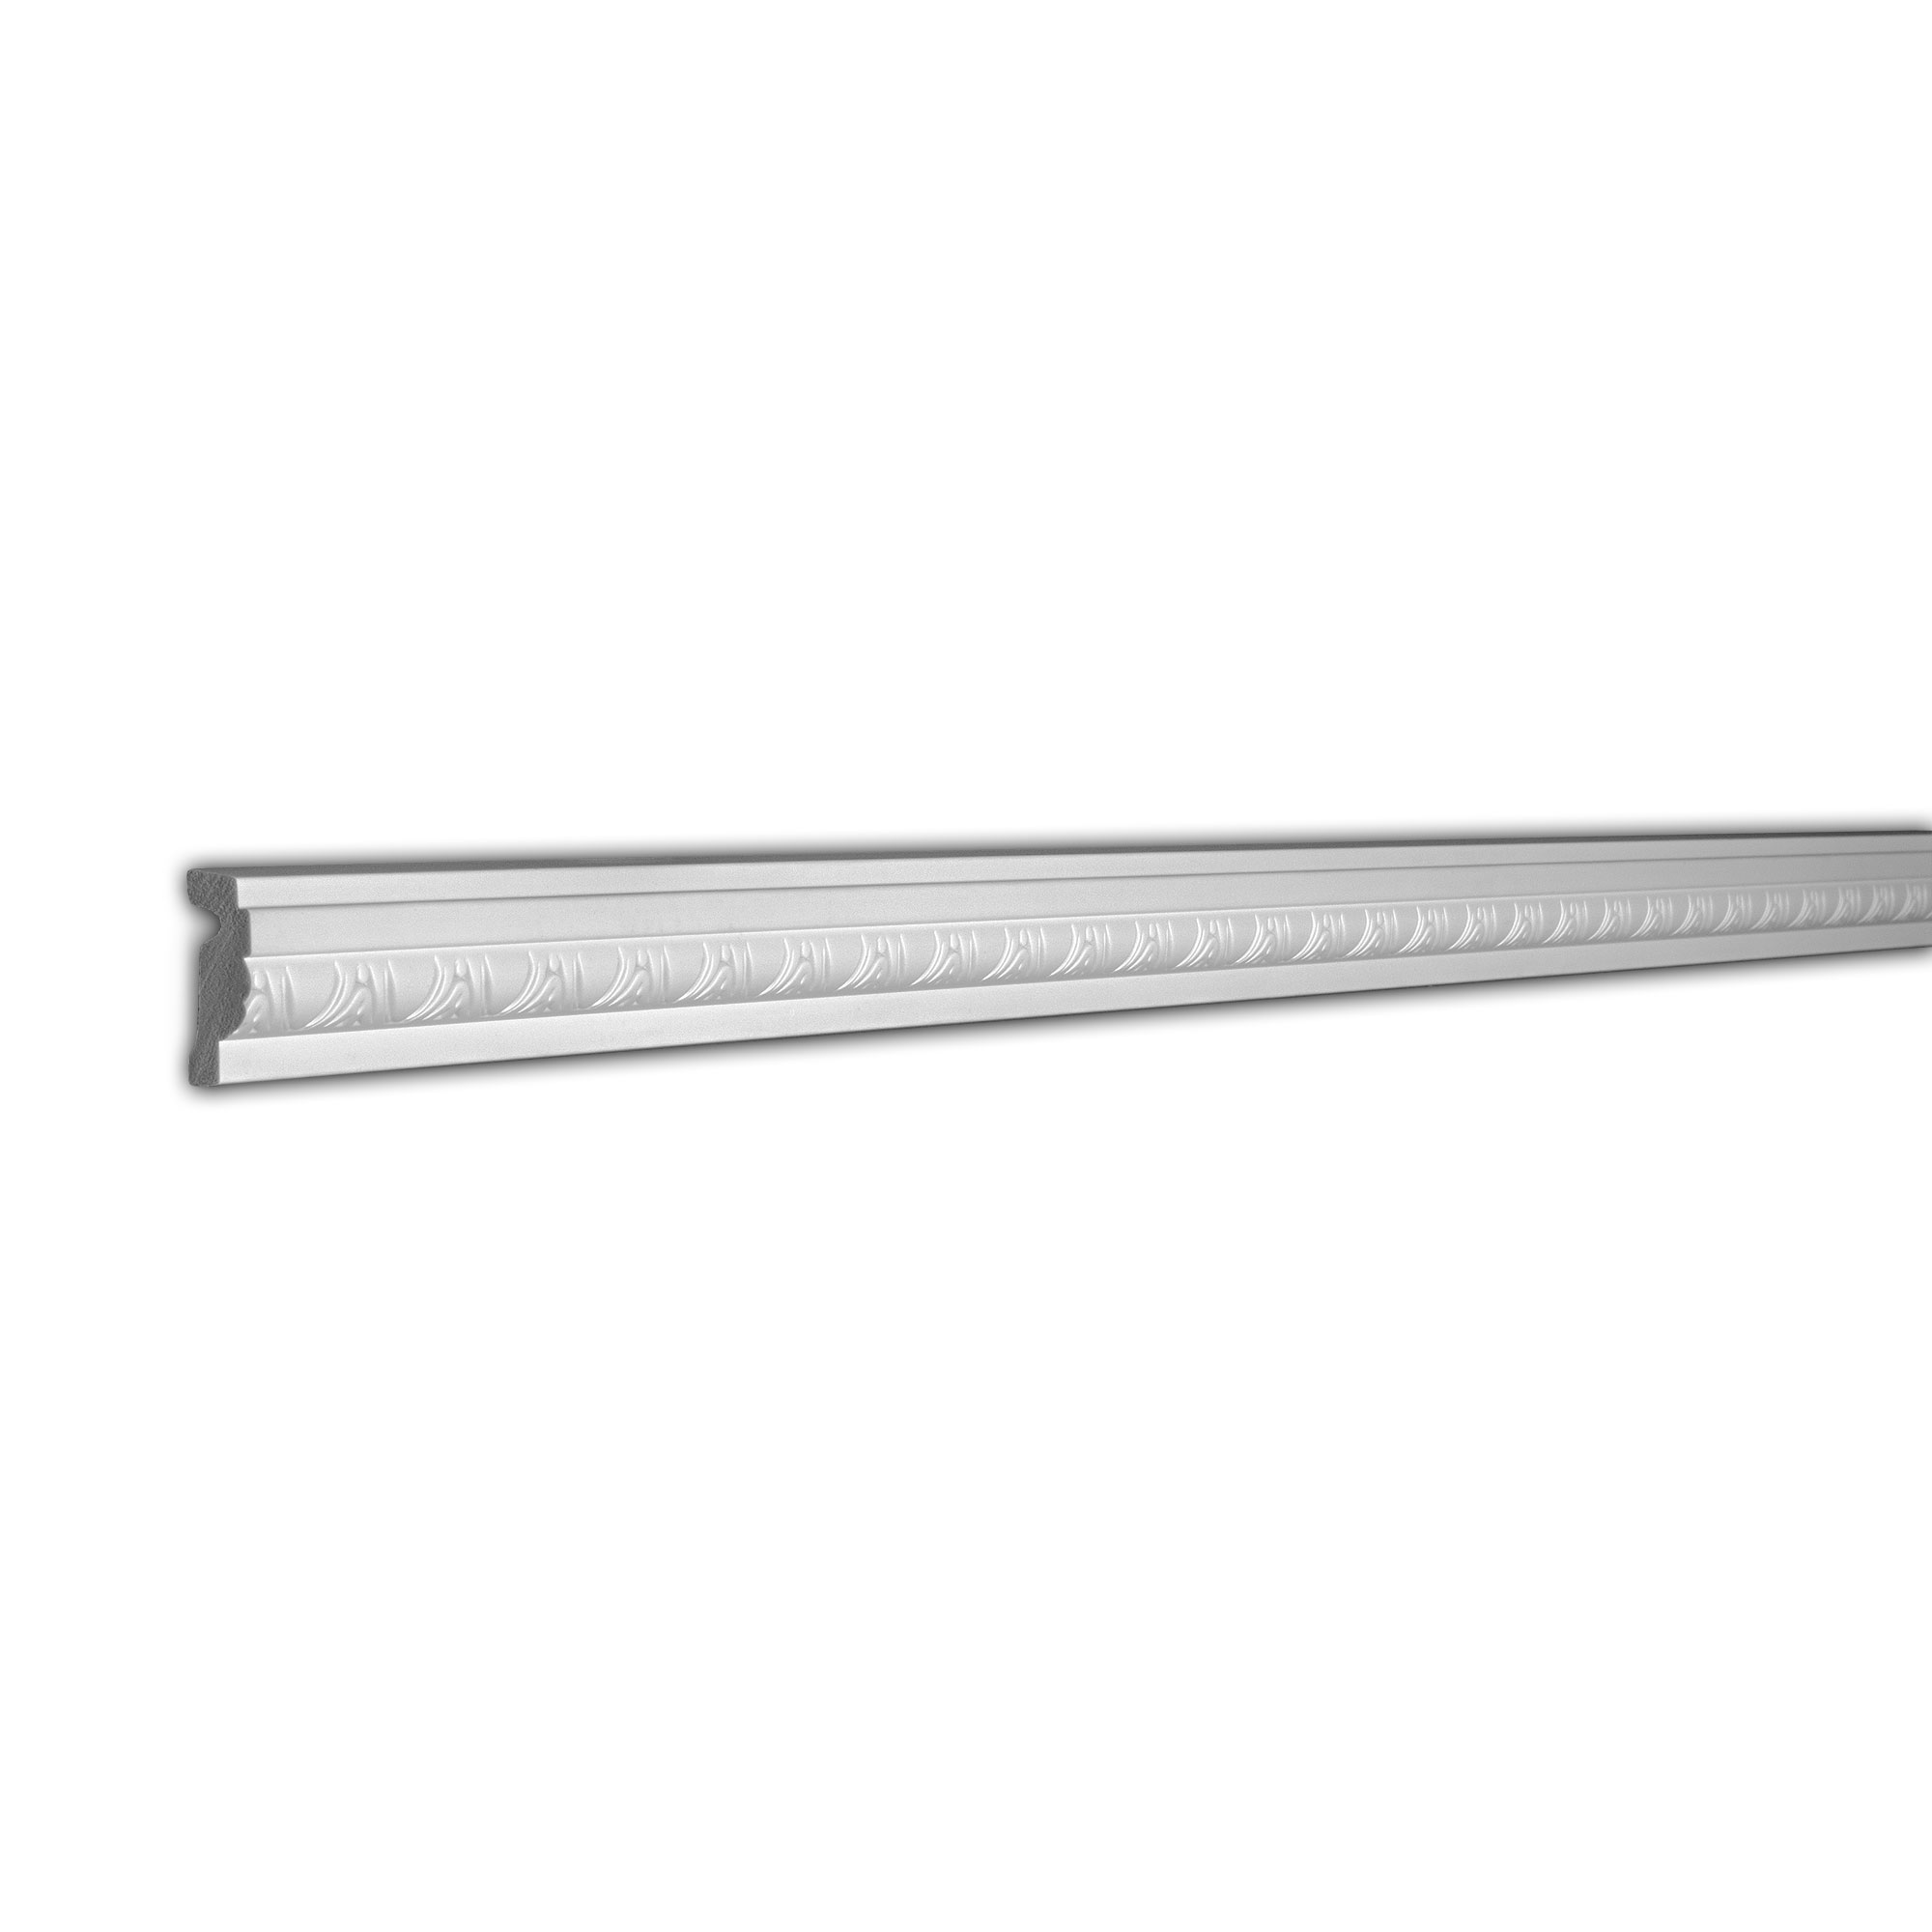 RPS-3319 H: 2" x Proj: 5/8" x L: 8' x Design Repeat: 1-3/4" Primed White Polymer Panel Moulding (7 Pack/54+Feet) - image 1 of 5